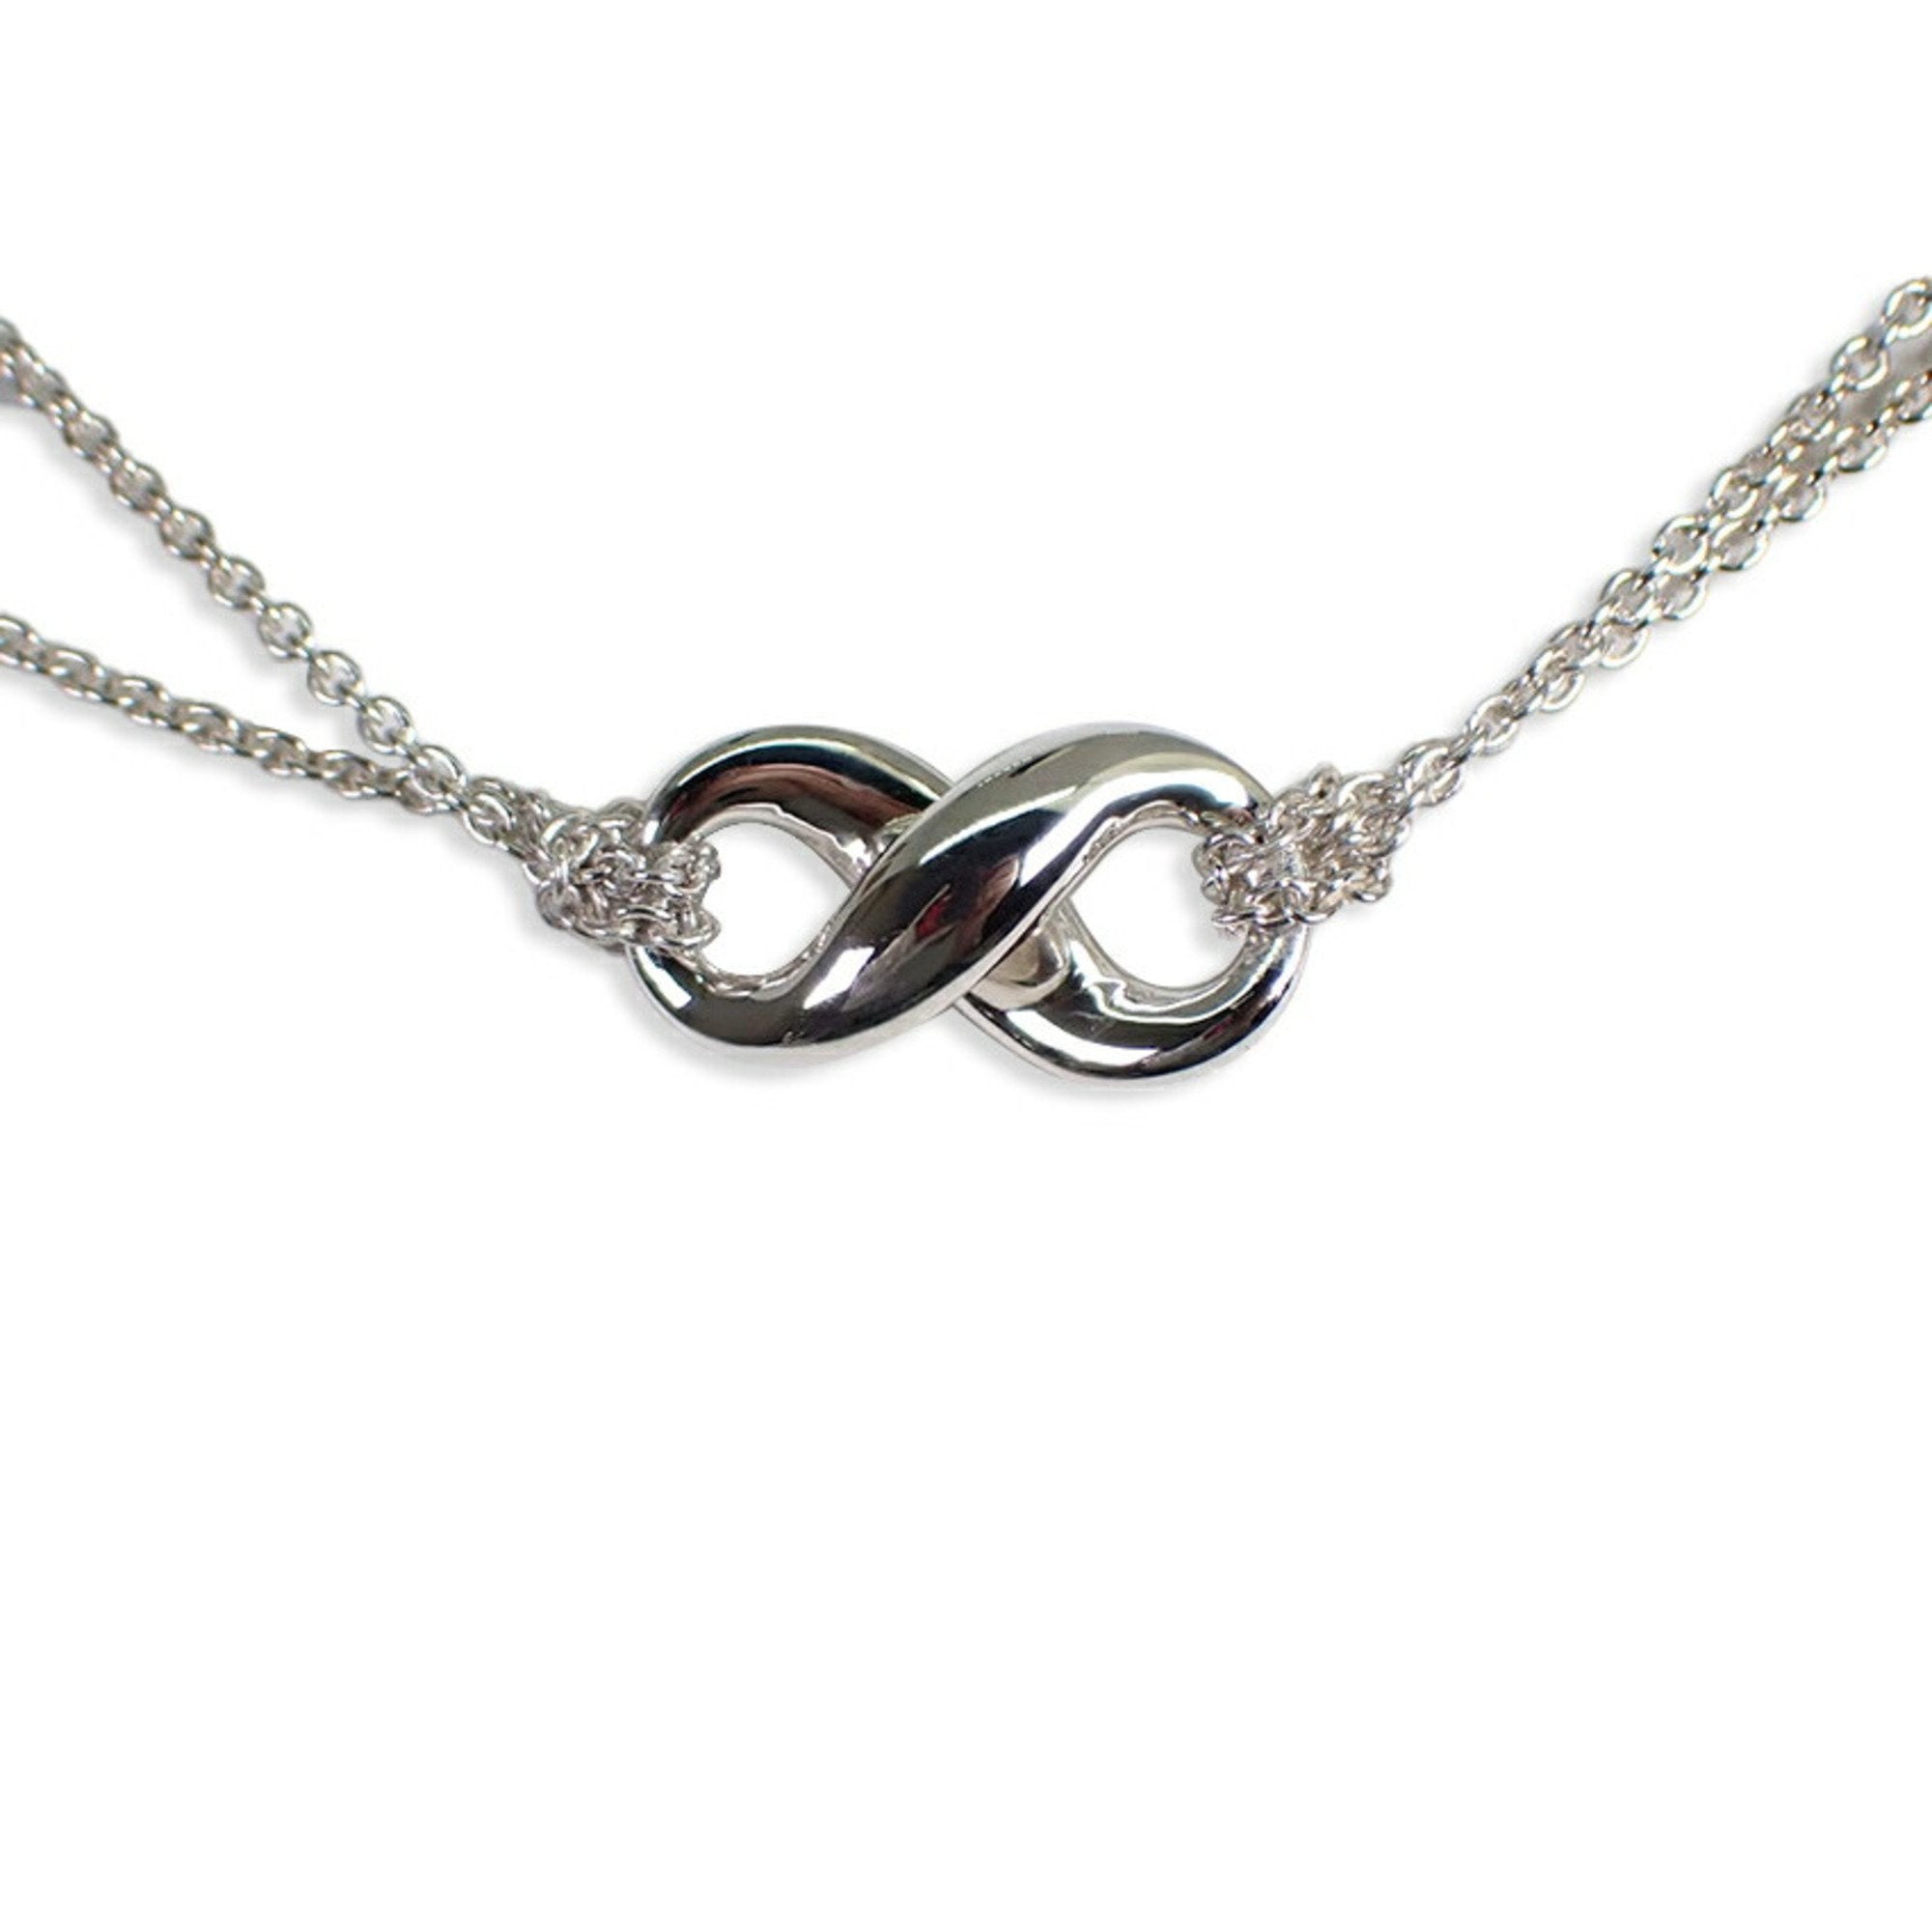 Tiffany & Co. INFINITY Pendant Necklace Double Strand Sterling Silver Orig  Box+ | eBay